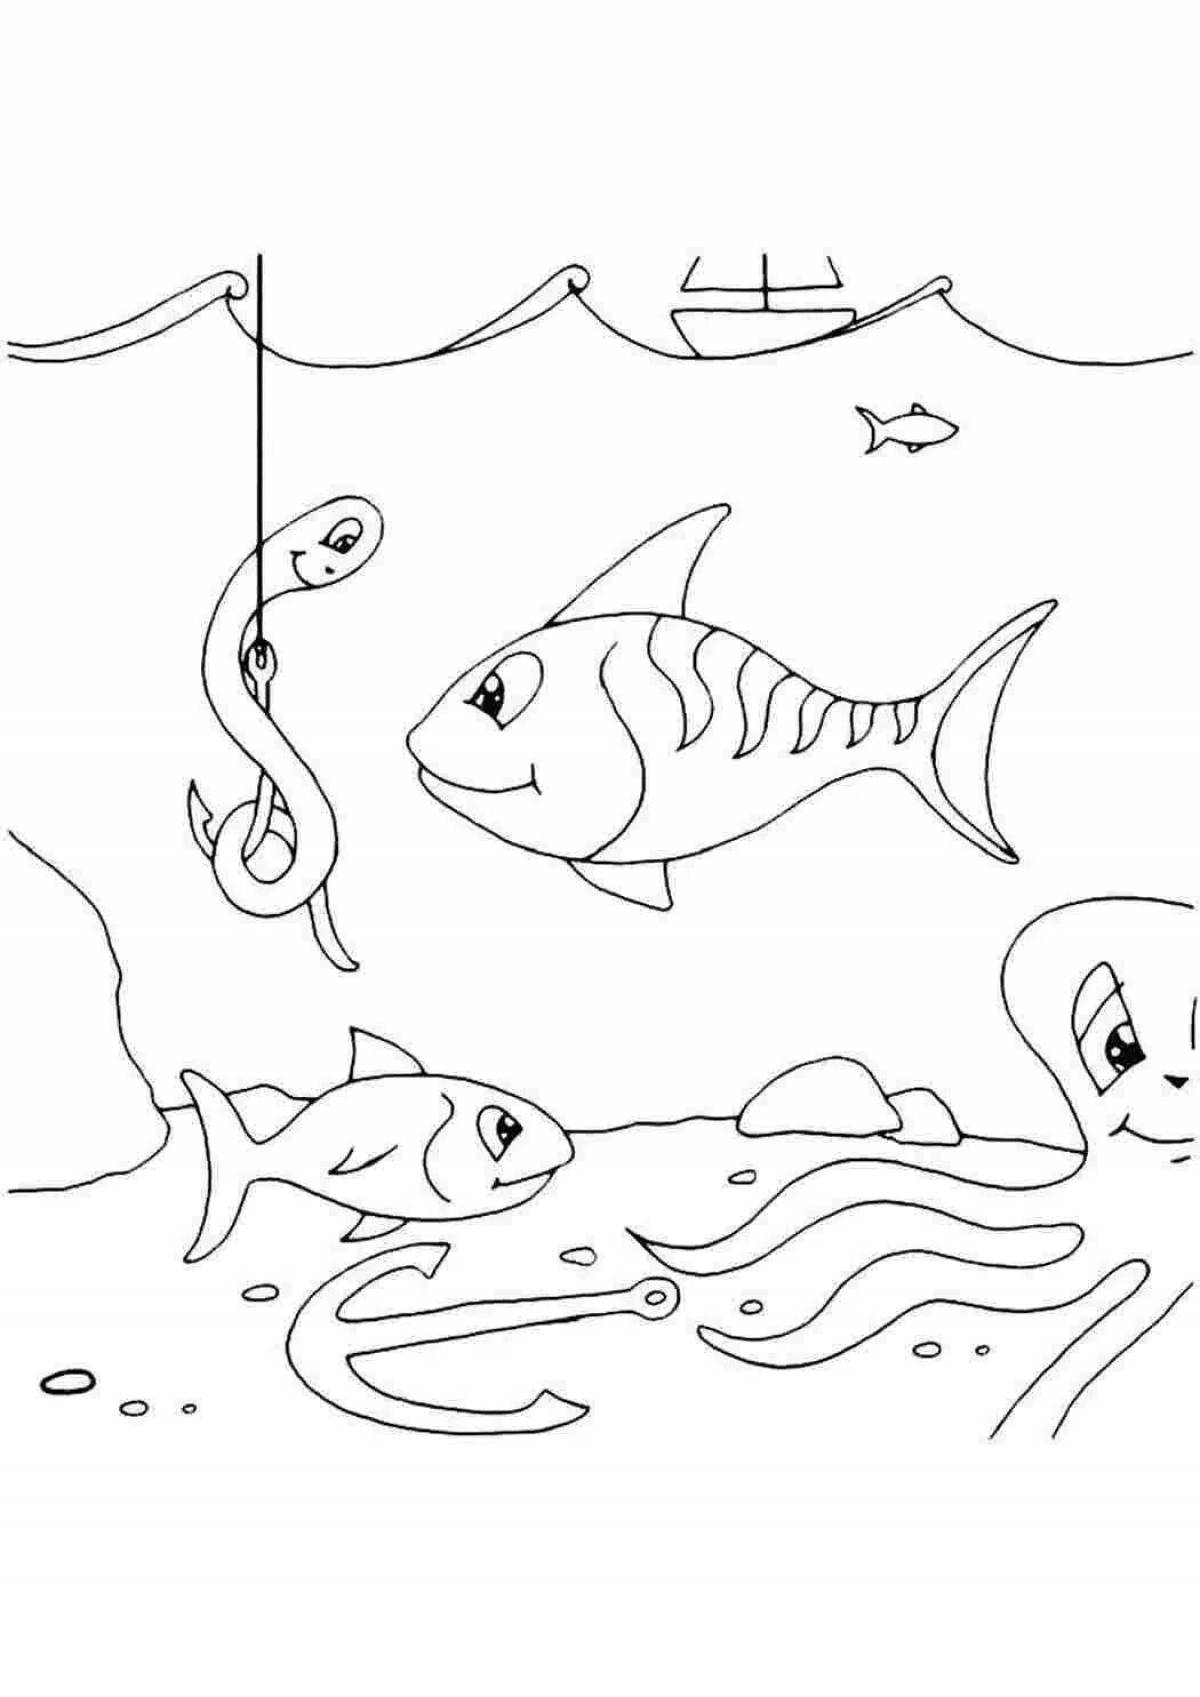 Glorious fisherman coloring for children